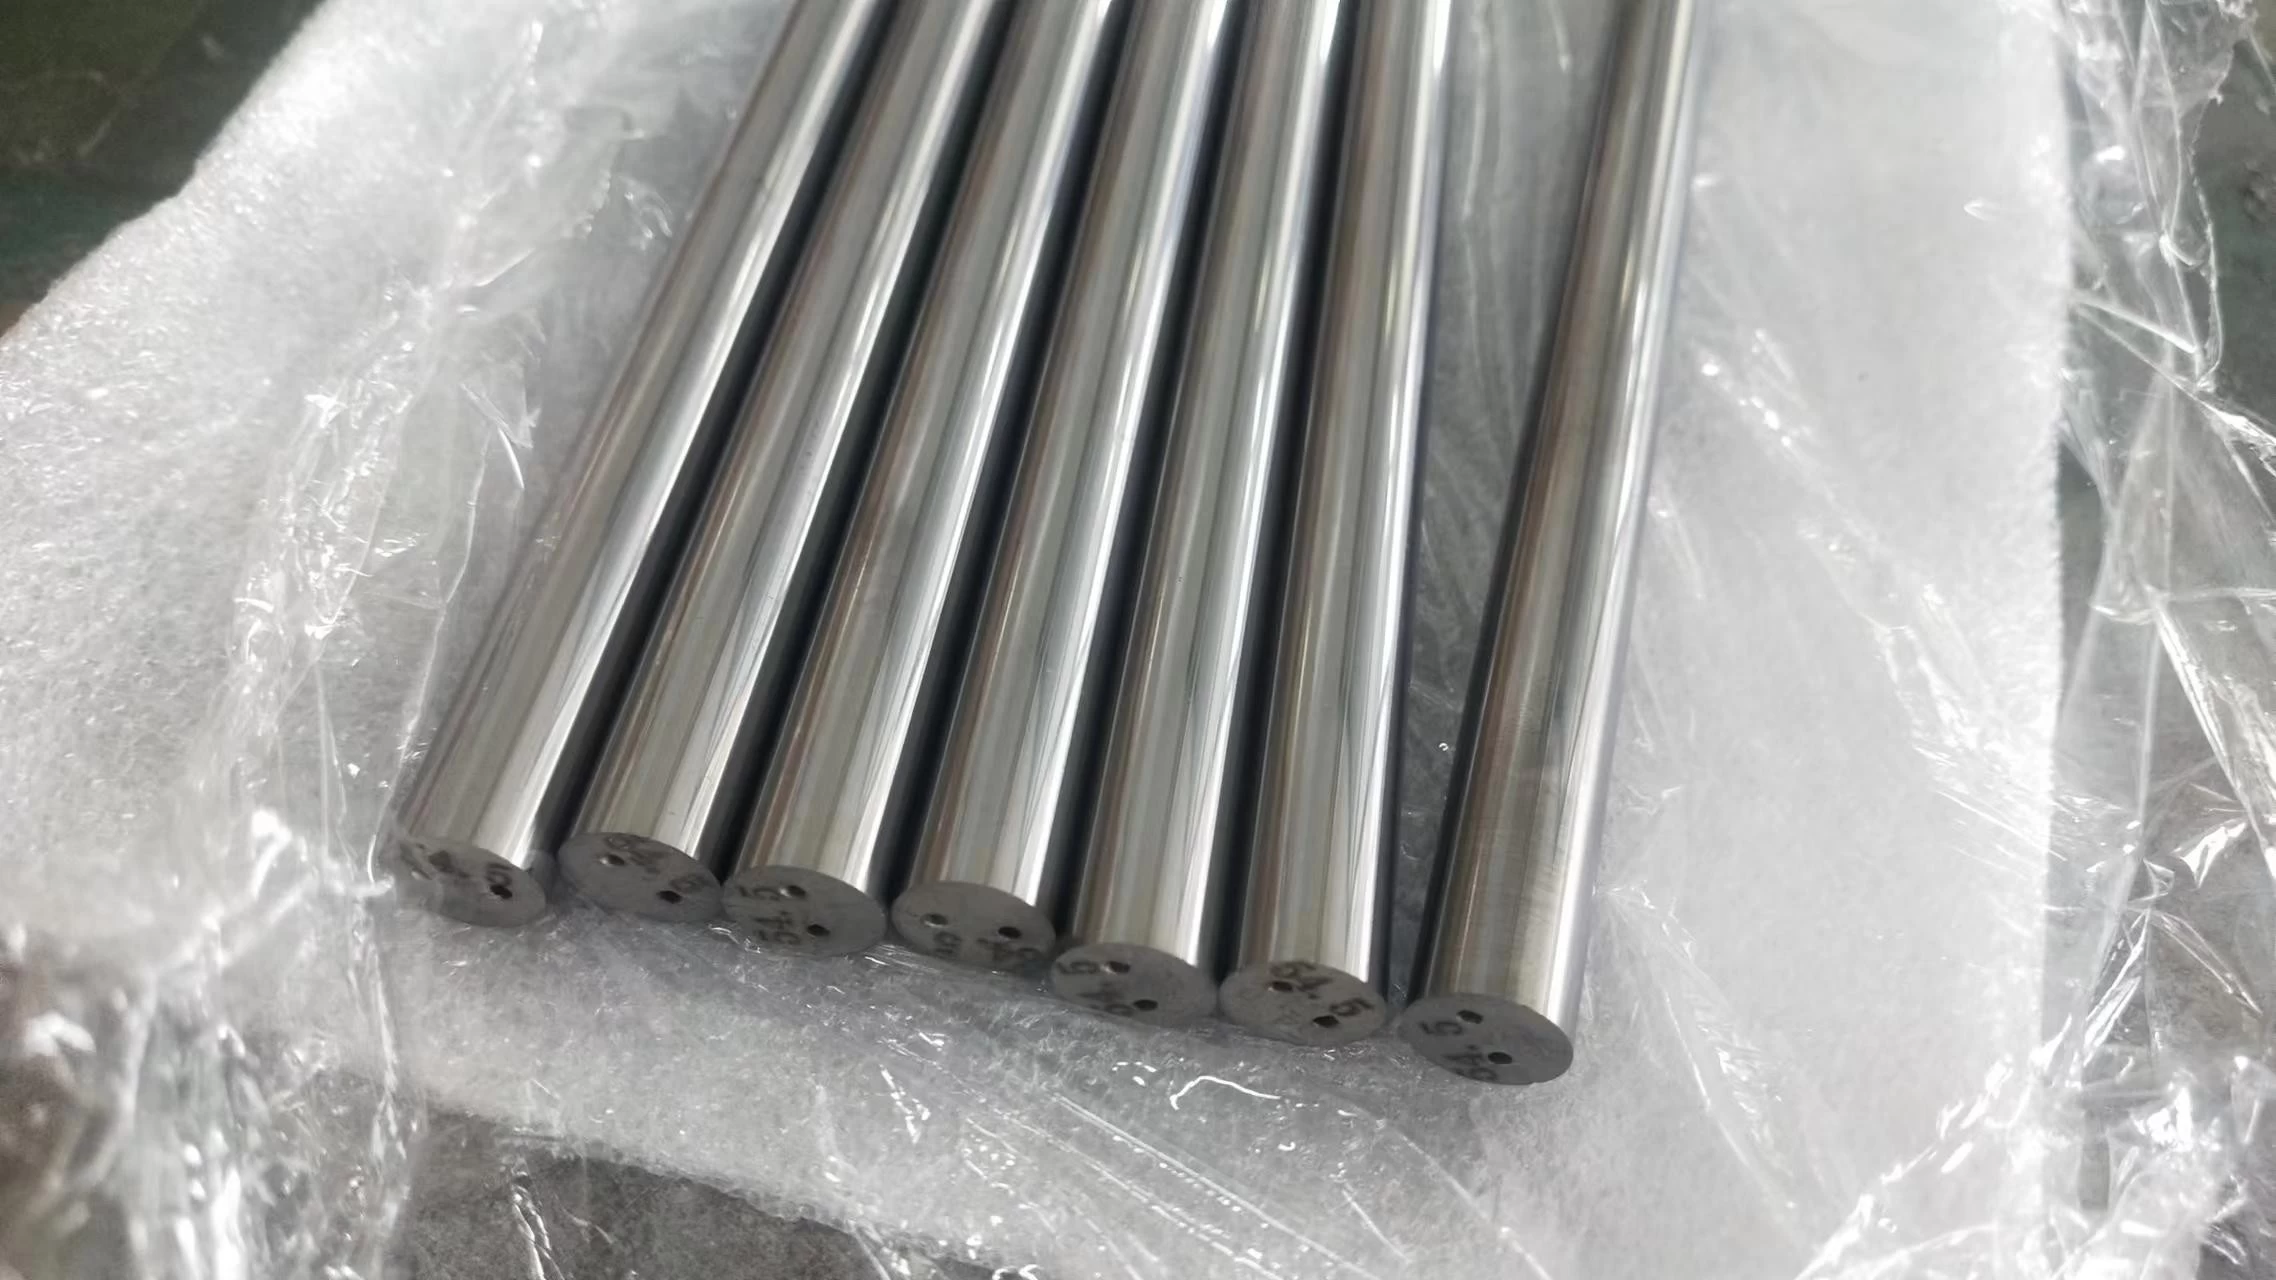 Tungsten Cemented Carbide Rods with Central Coolant Hole